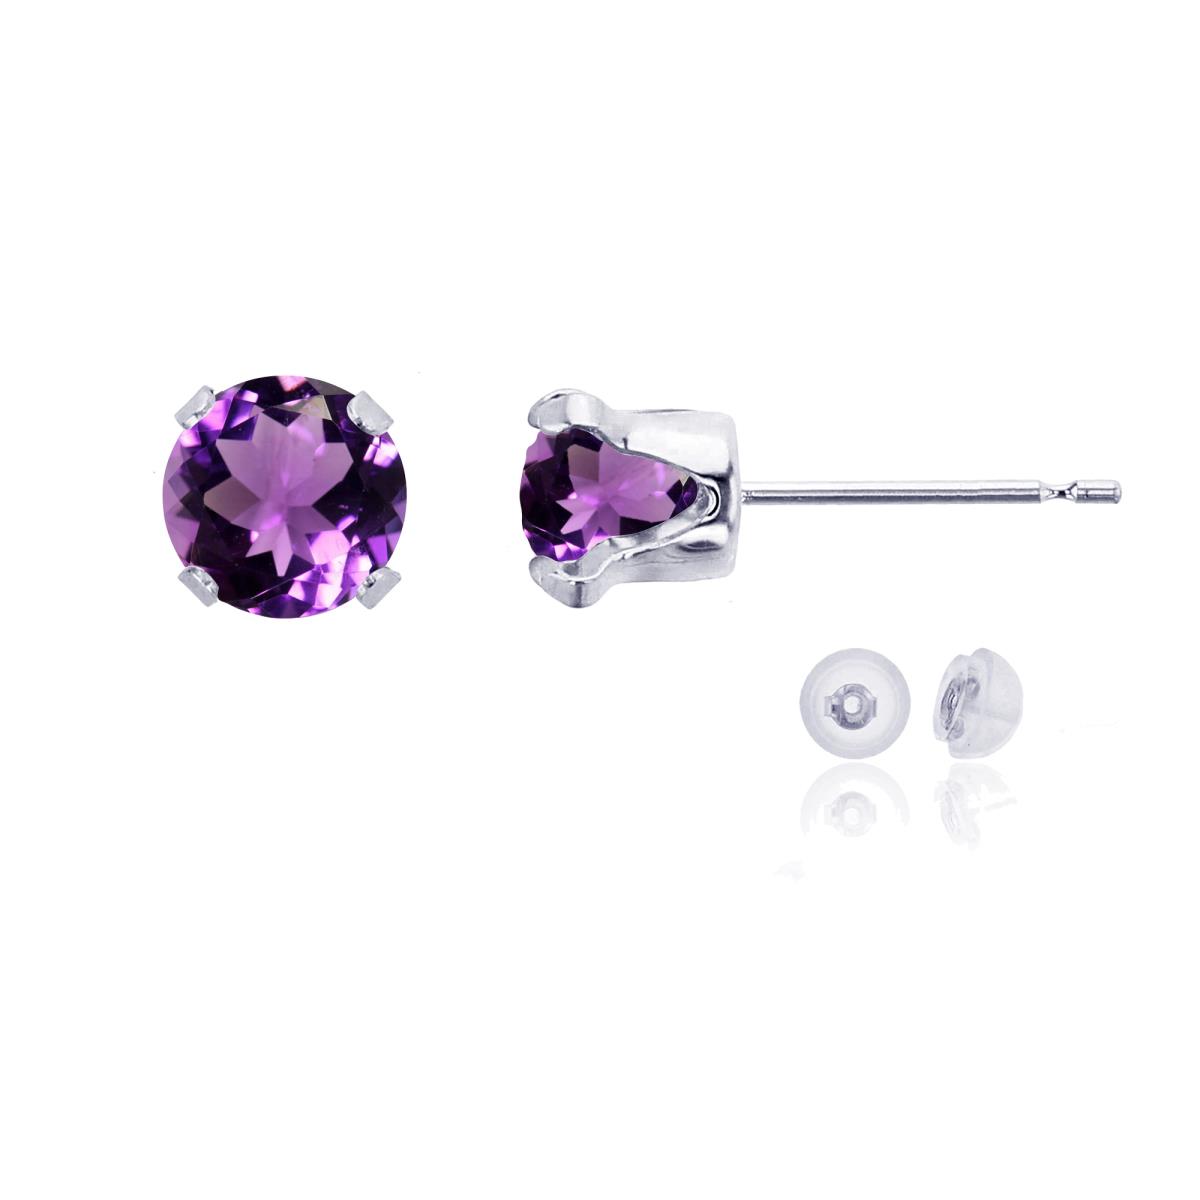 10K White Gold 6mm Round Amethyst Stud Earring with Silicone Back